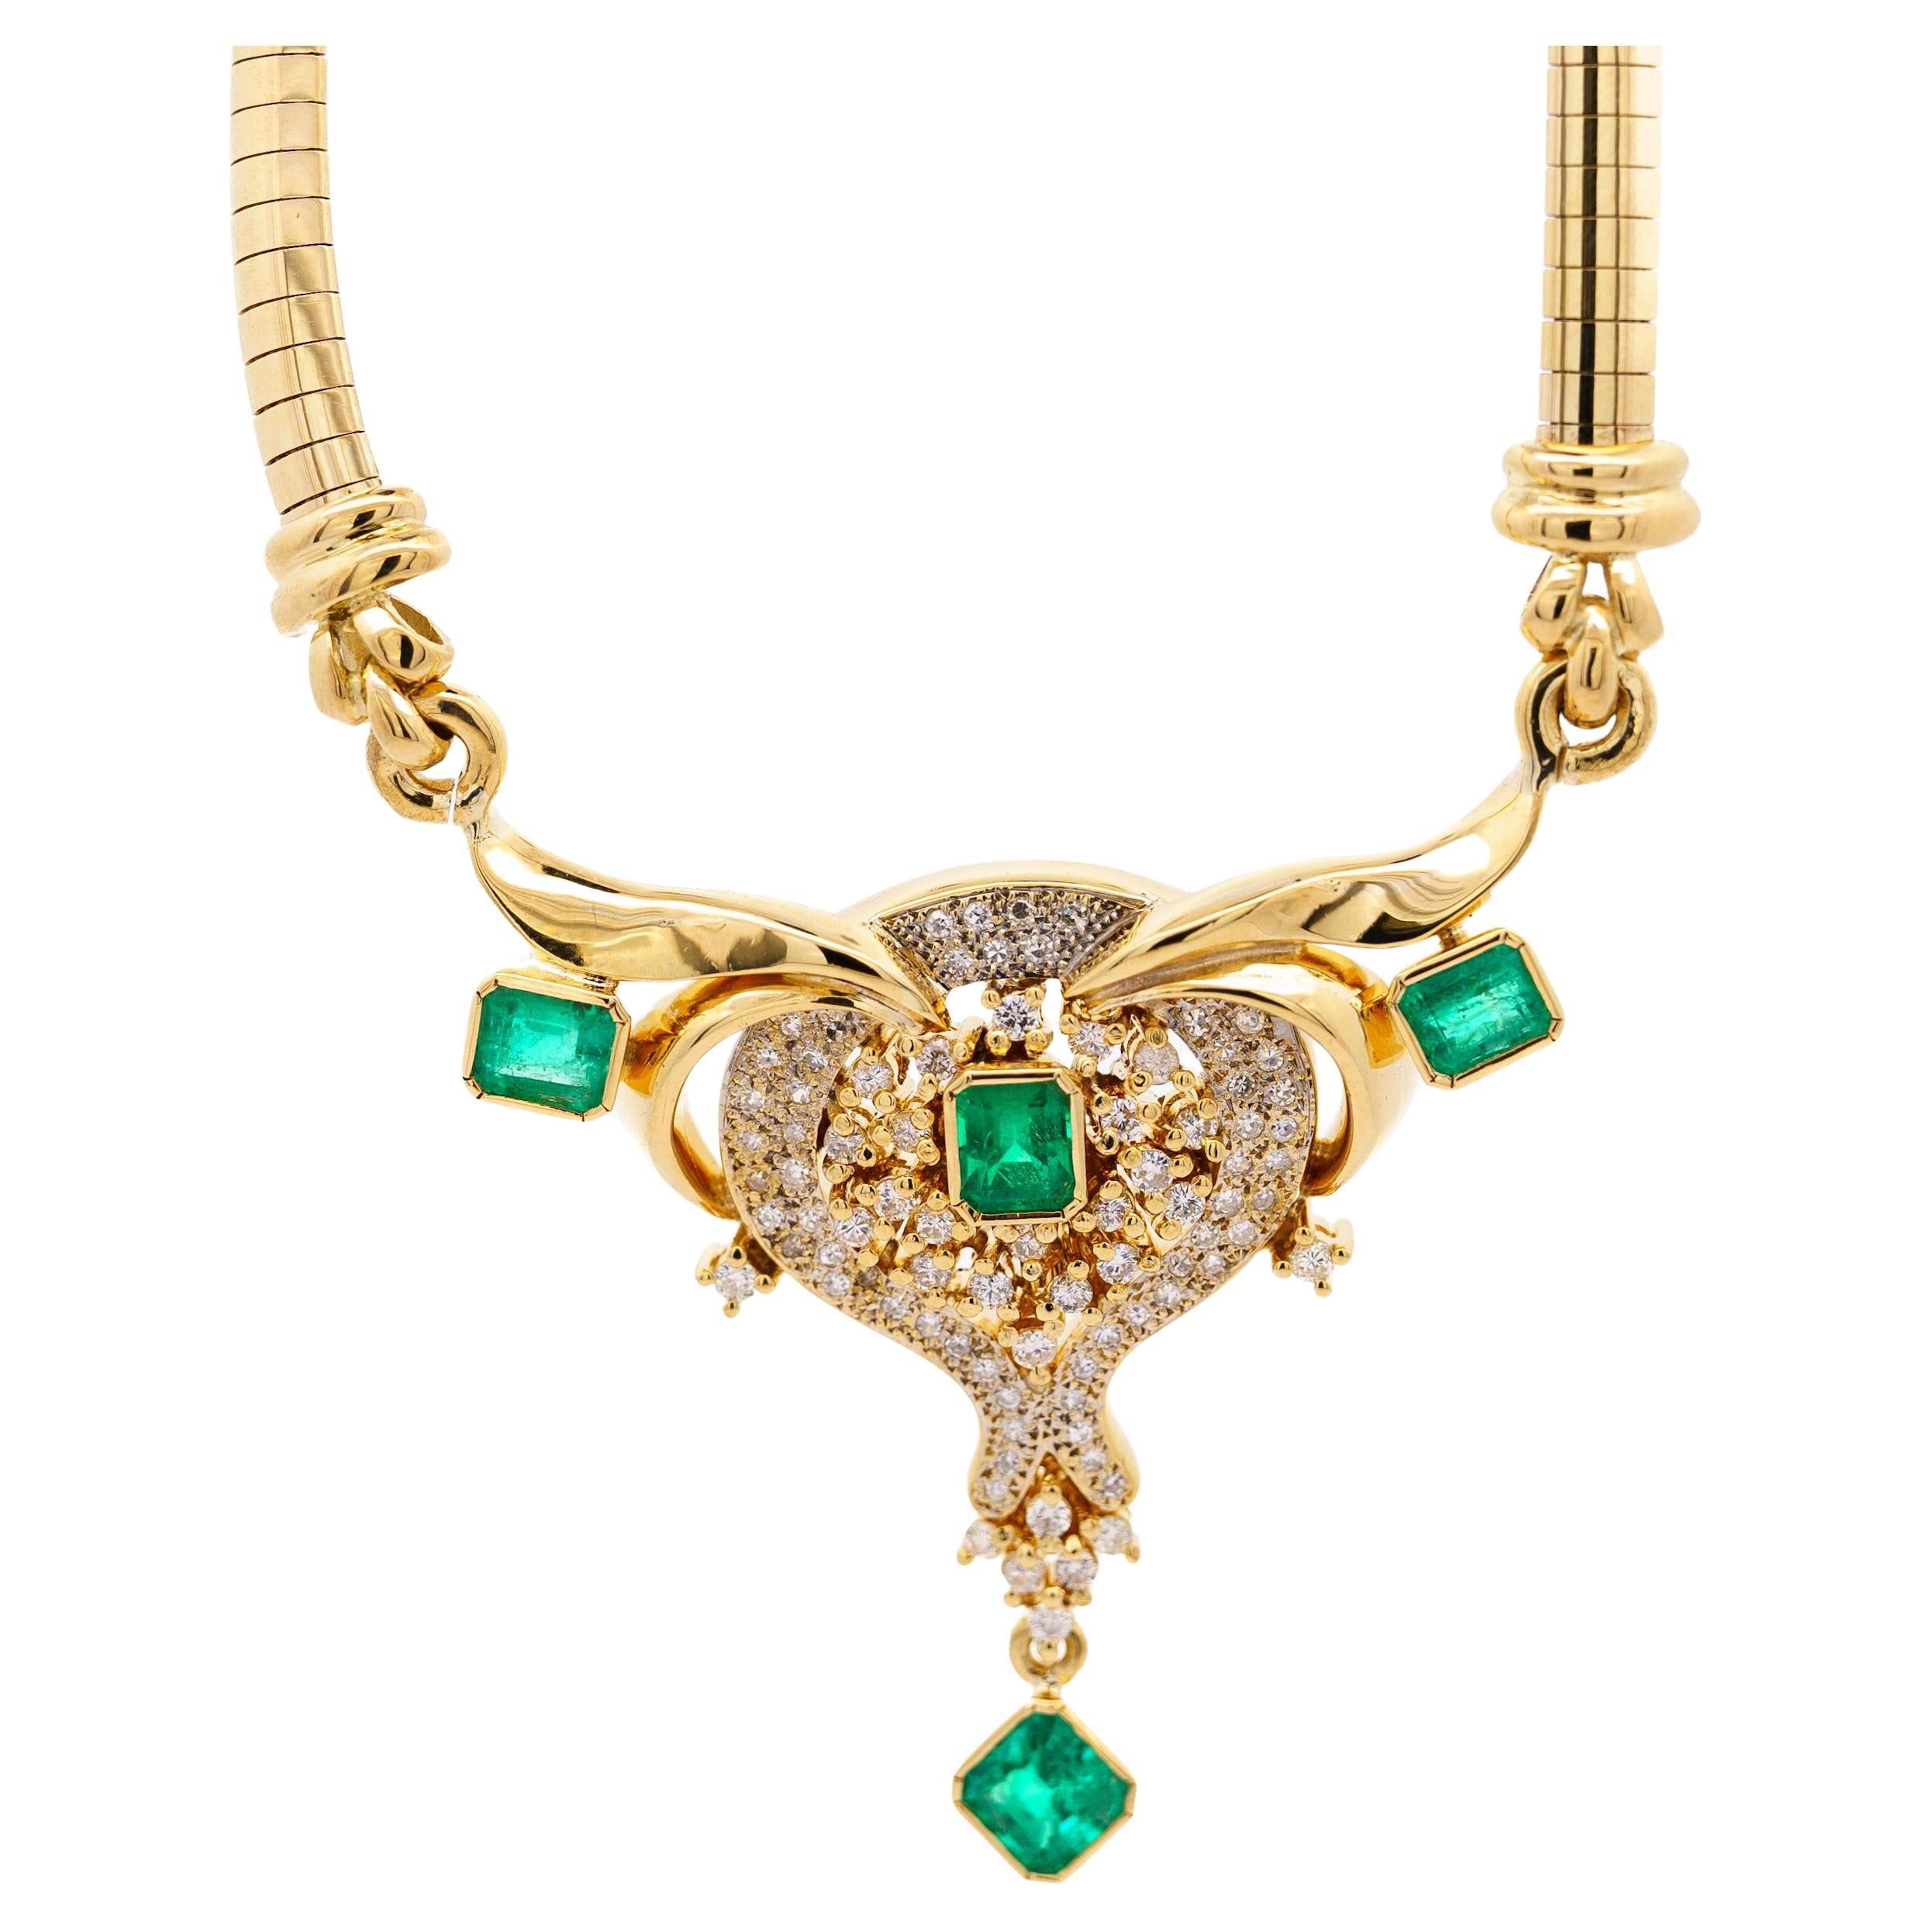 Vintage 5 Carat Emerald & Diamond Necklace in 14K Yellow Gold